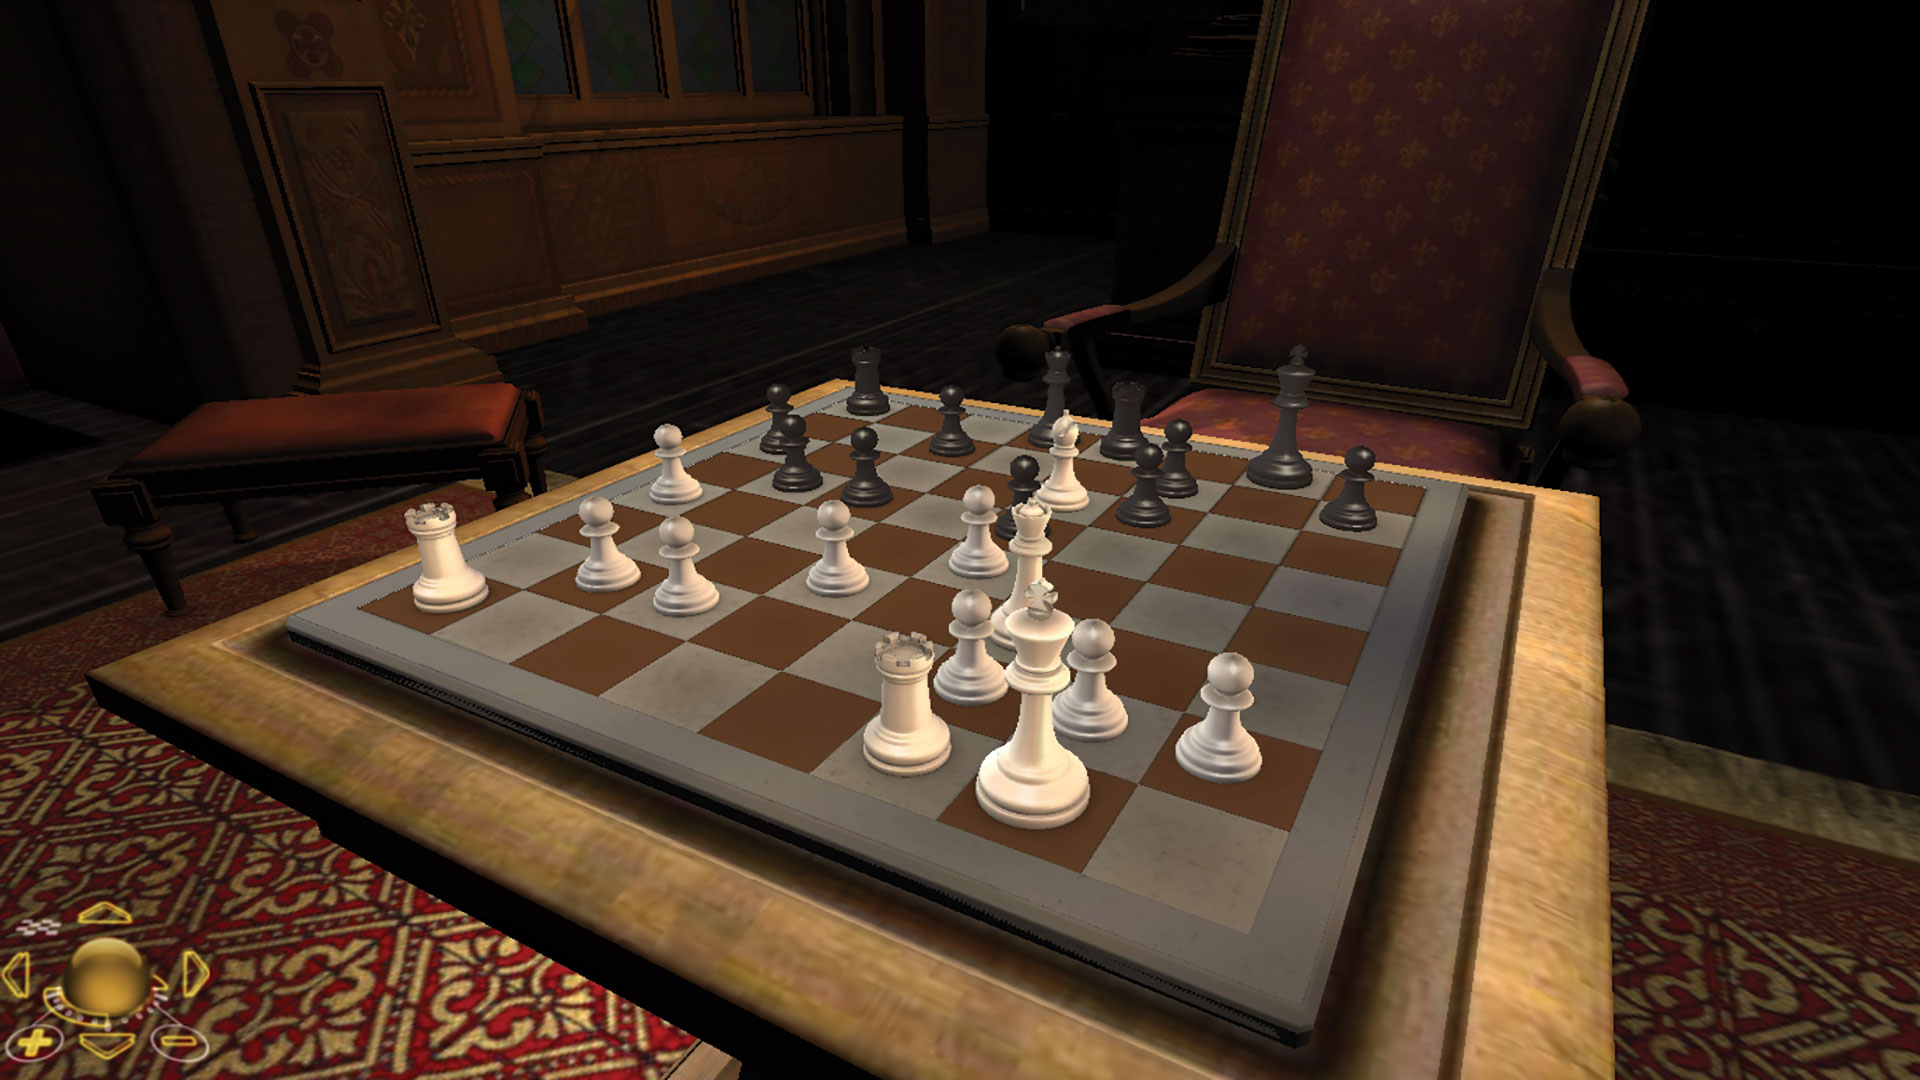 fritz chess game